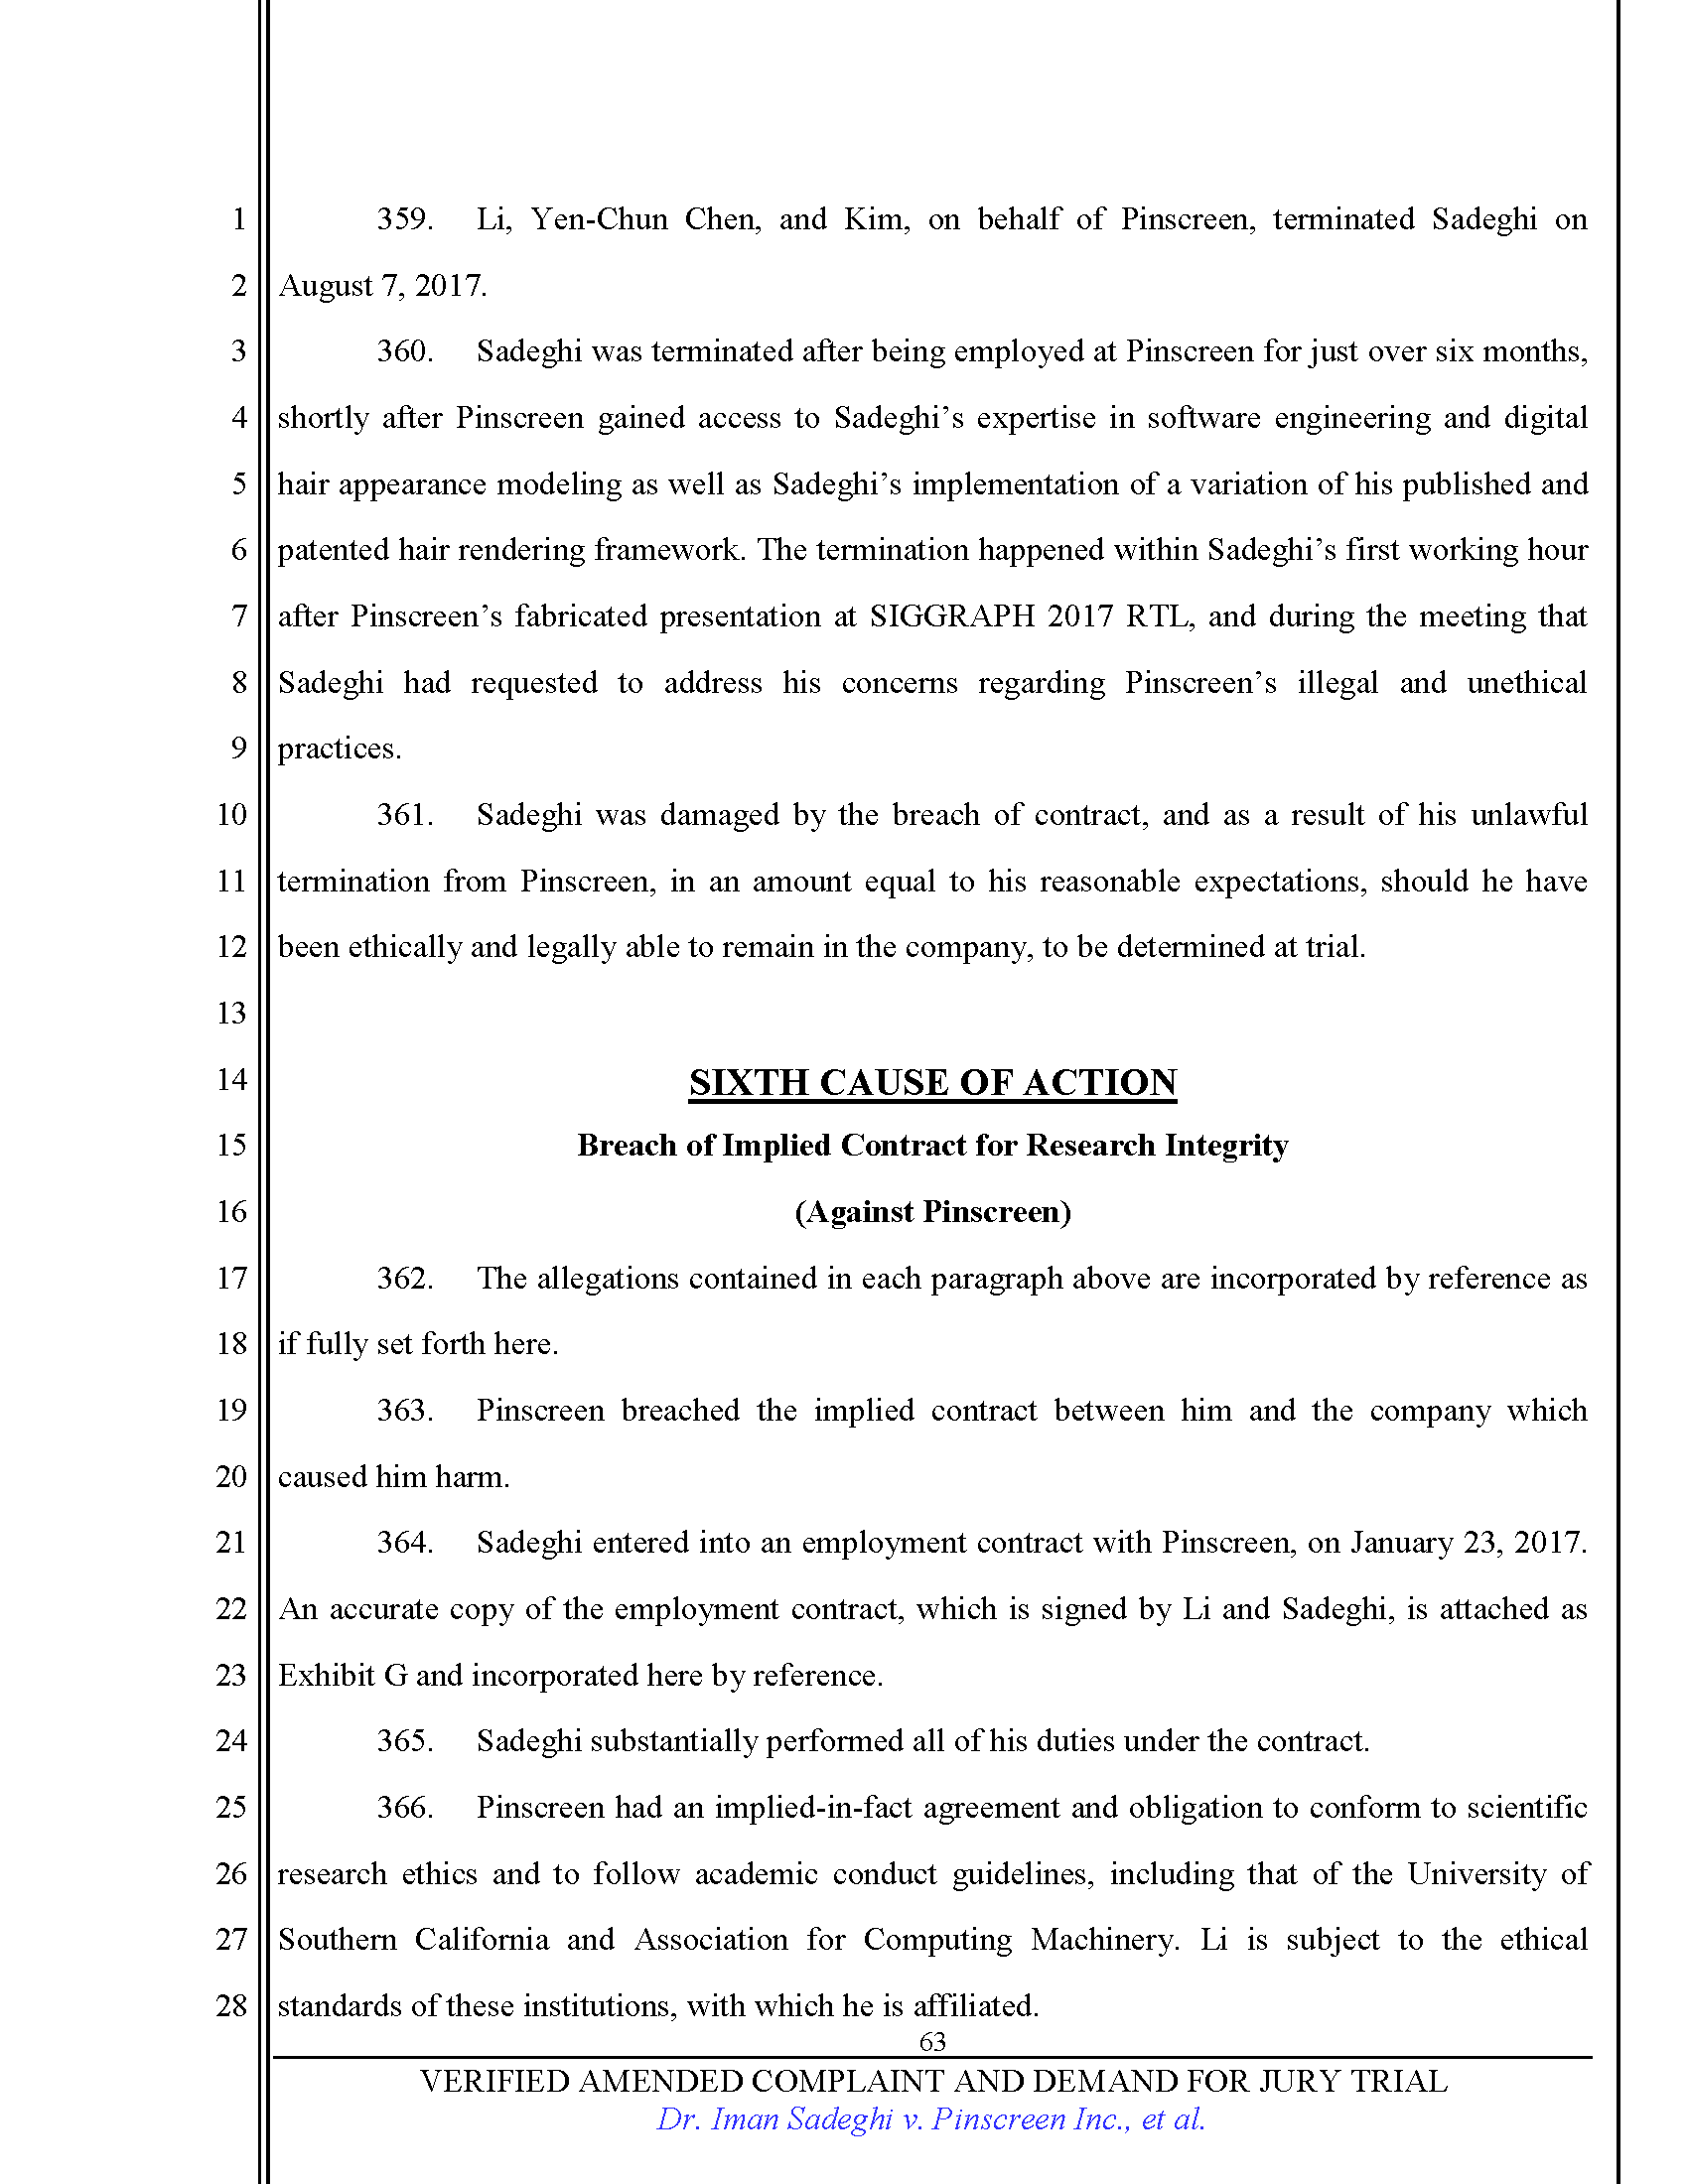 First Amended Complaint (FAC) Page 63